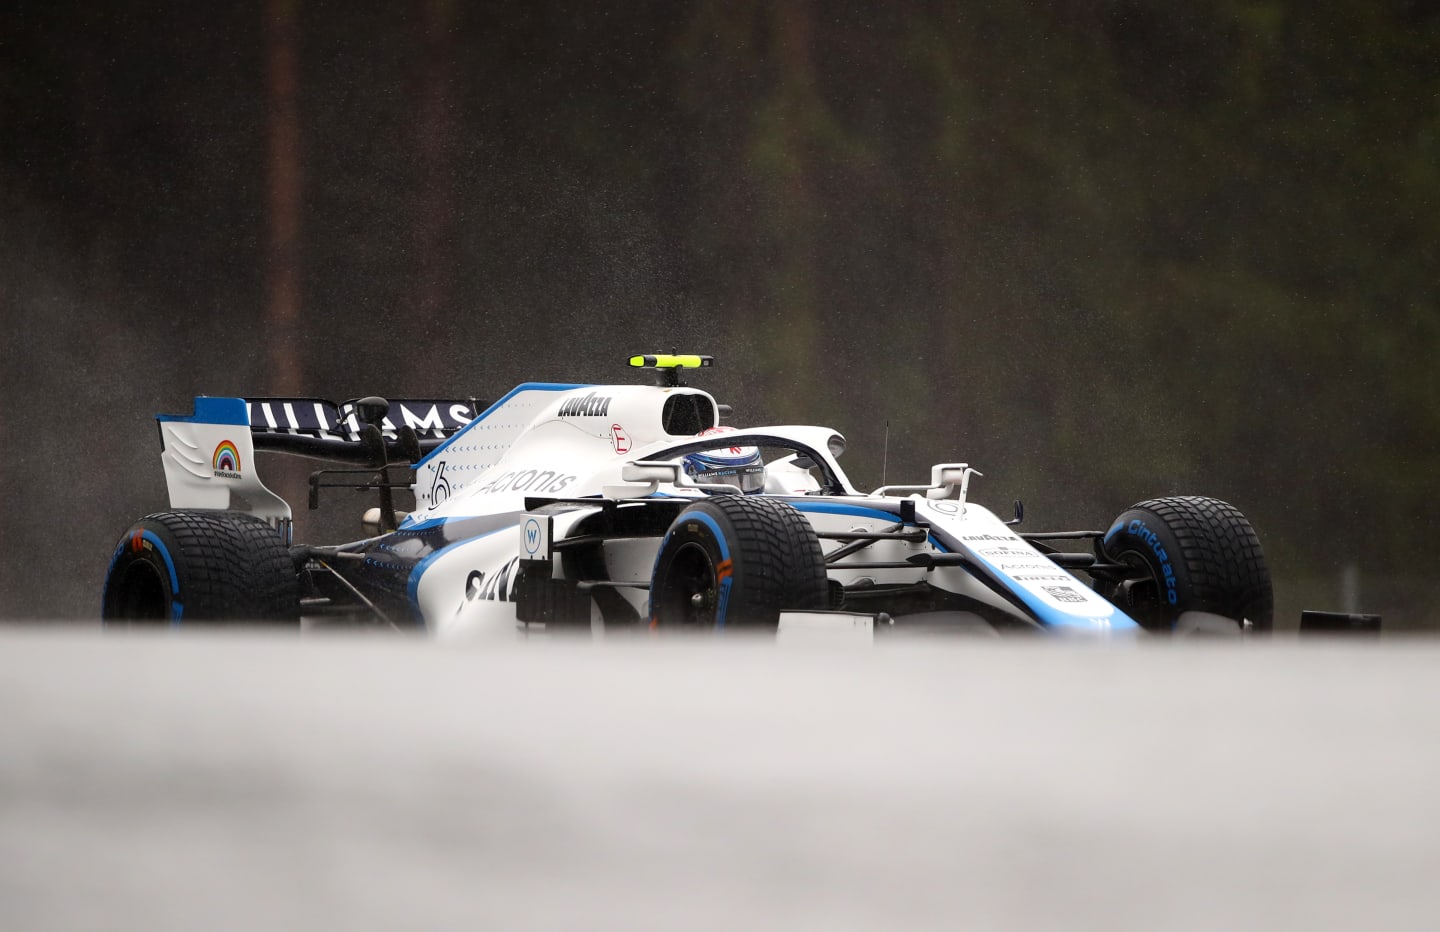 SPIELBERG, AUSTRIA - JULY 11: Nicholas Latifi of Canada driving the (6) Williams Racing FW43 Mercedes on track  during qualifying for the Formula One Grand Prix of Styria at Red Bull Ring on July 11, 2020 in Spielberg, Austria. (Photo by Bryn Lennon/Getty Images)